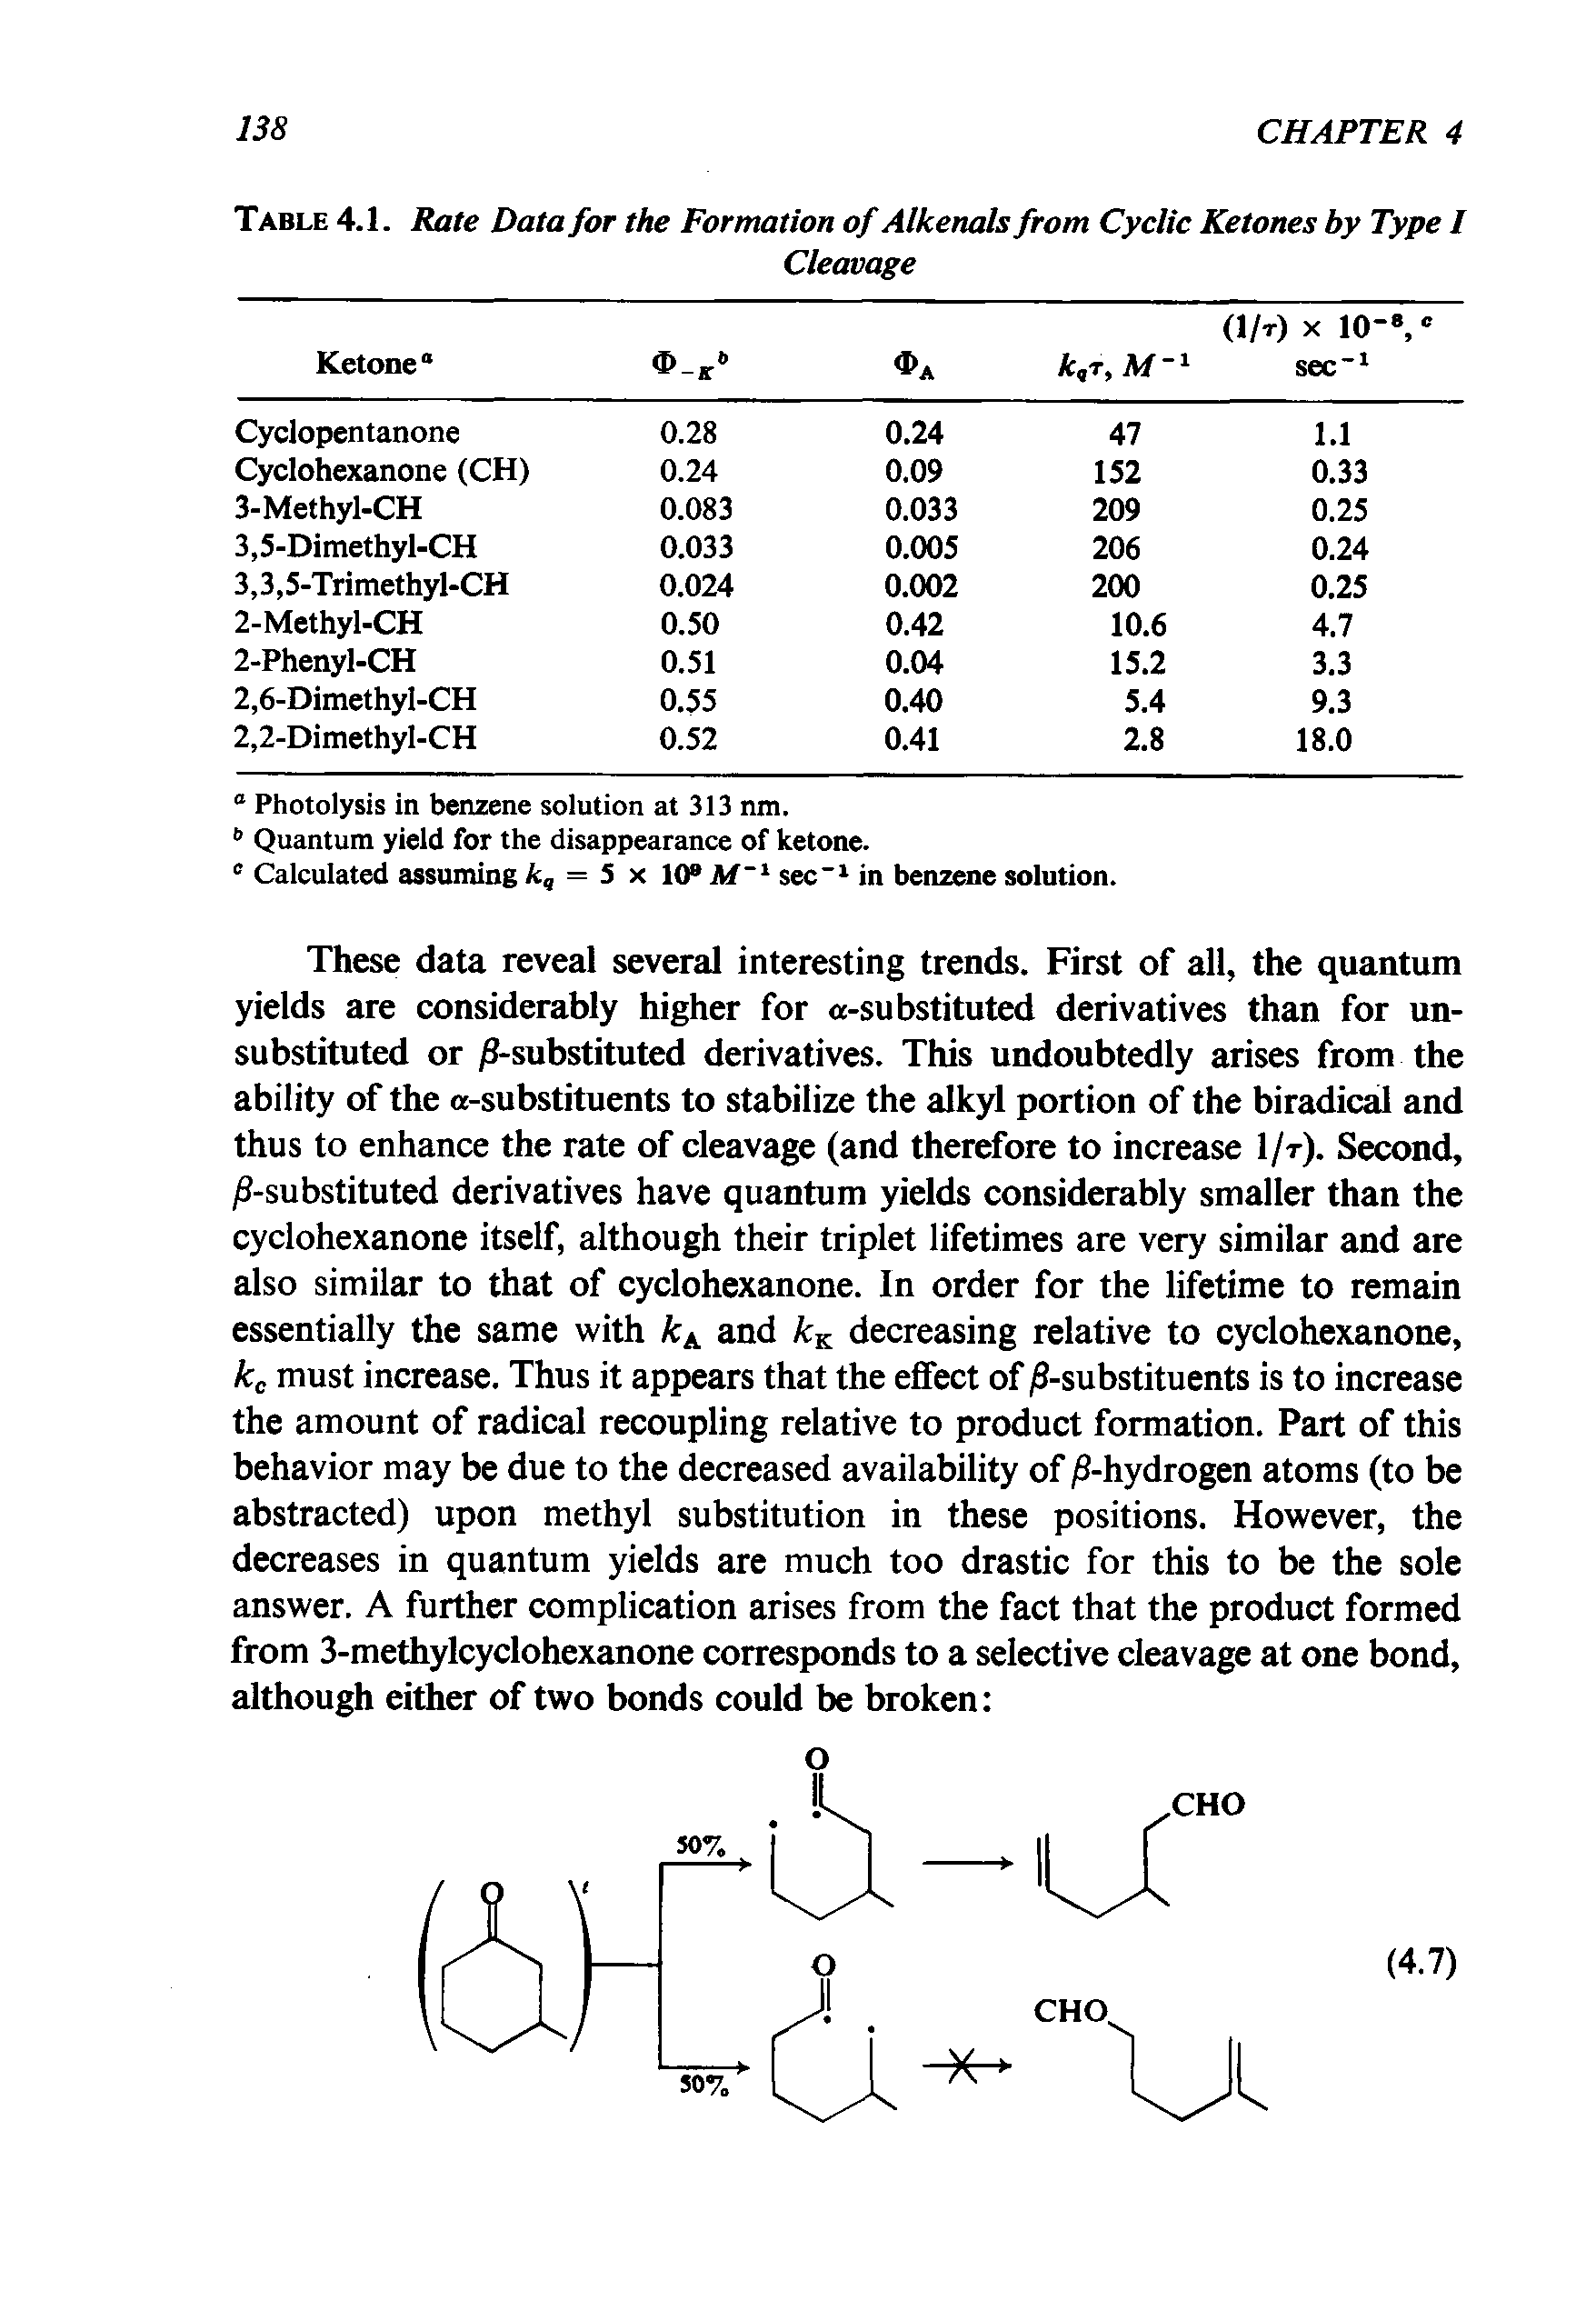 Table 4.1. Rate Data for the Formation of Alkenals from Cyclic Ketones by Type I...